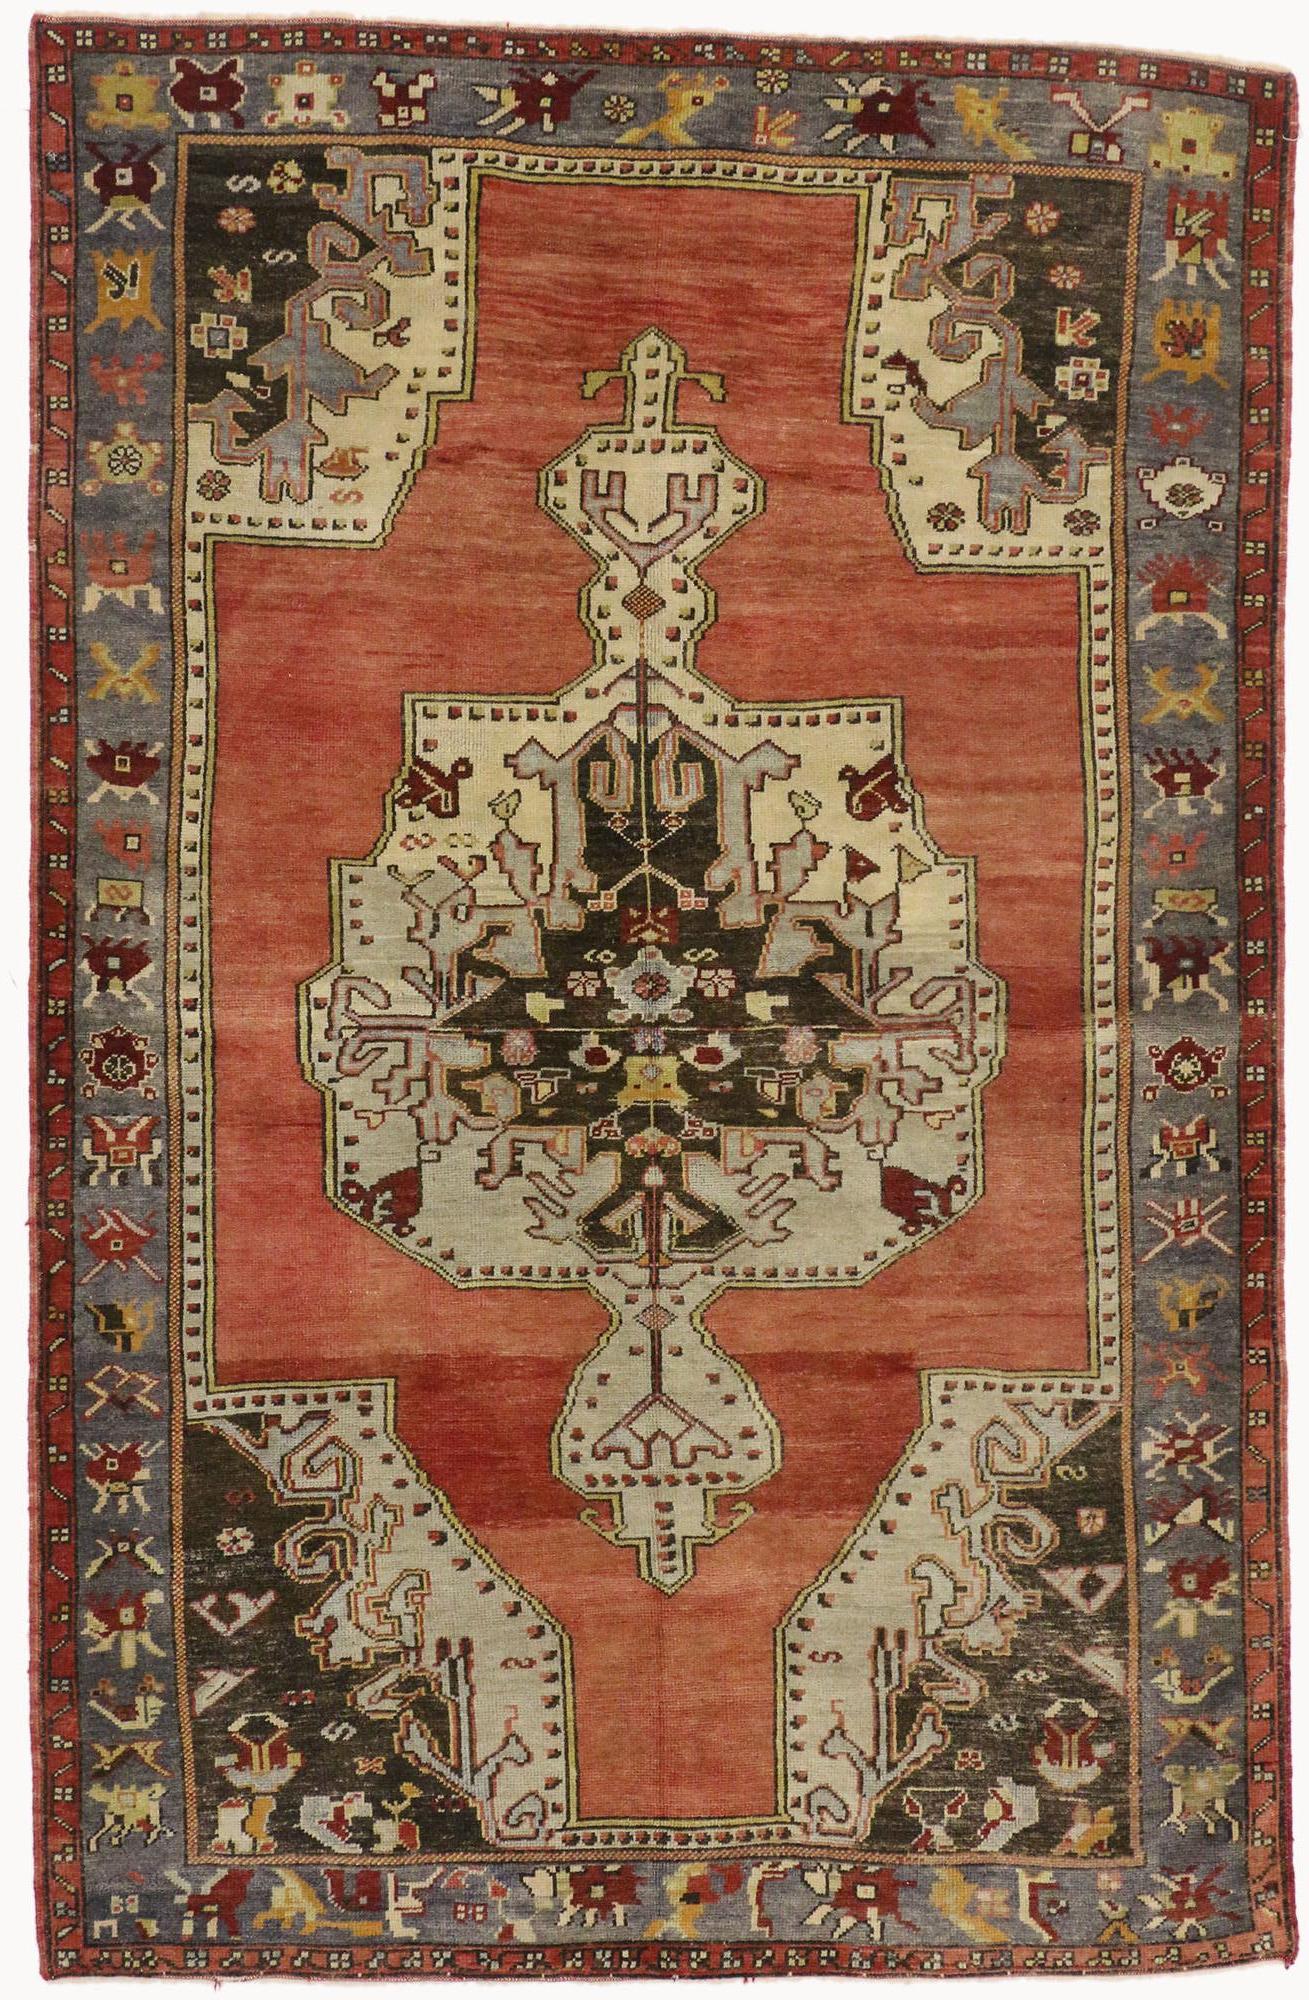 74077 A vintage Oushak rug with Classic medallion and corner motif. This hand-knotted wool vintage Turkish Oushak rug displays a Mid-Century Modern style. Opulent, yet appealing in its simplicity, this Classic Oushak rug is rendered in brilliant